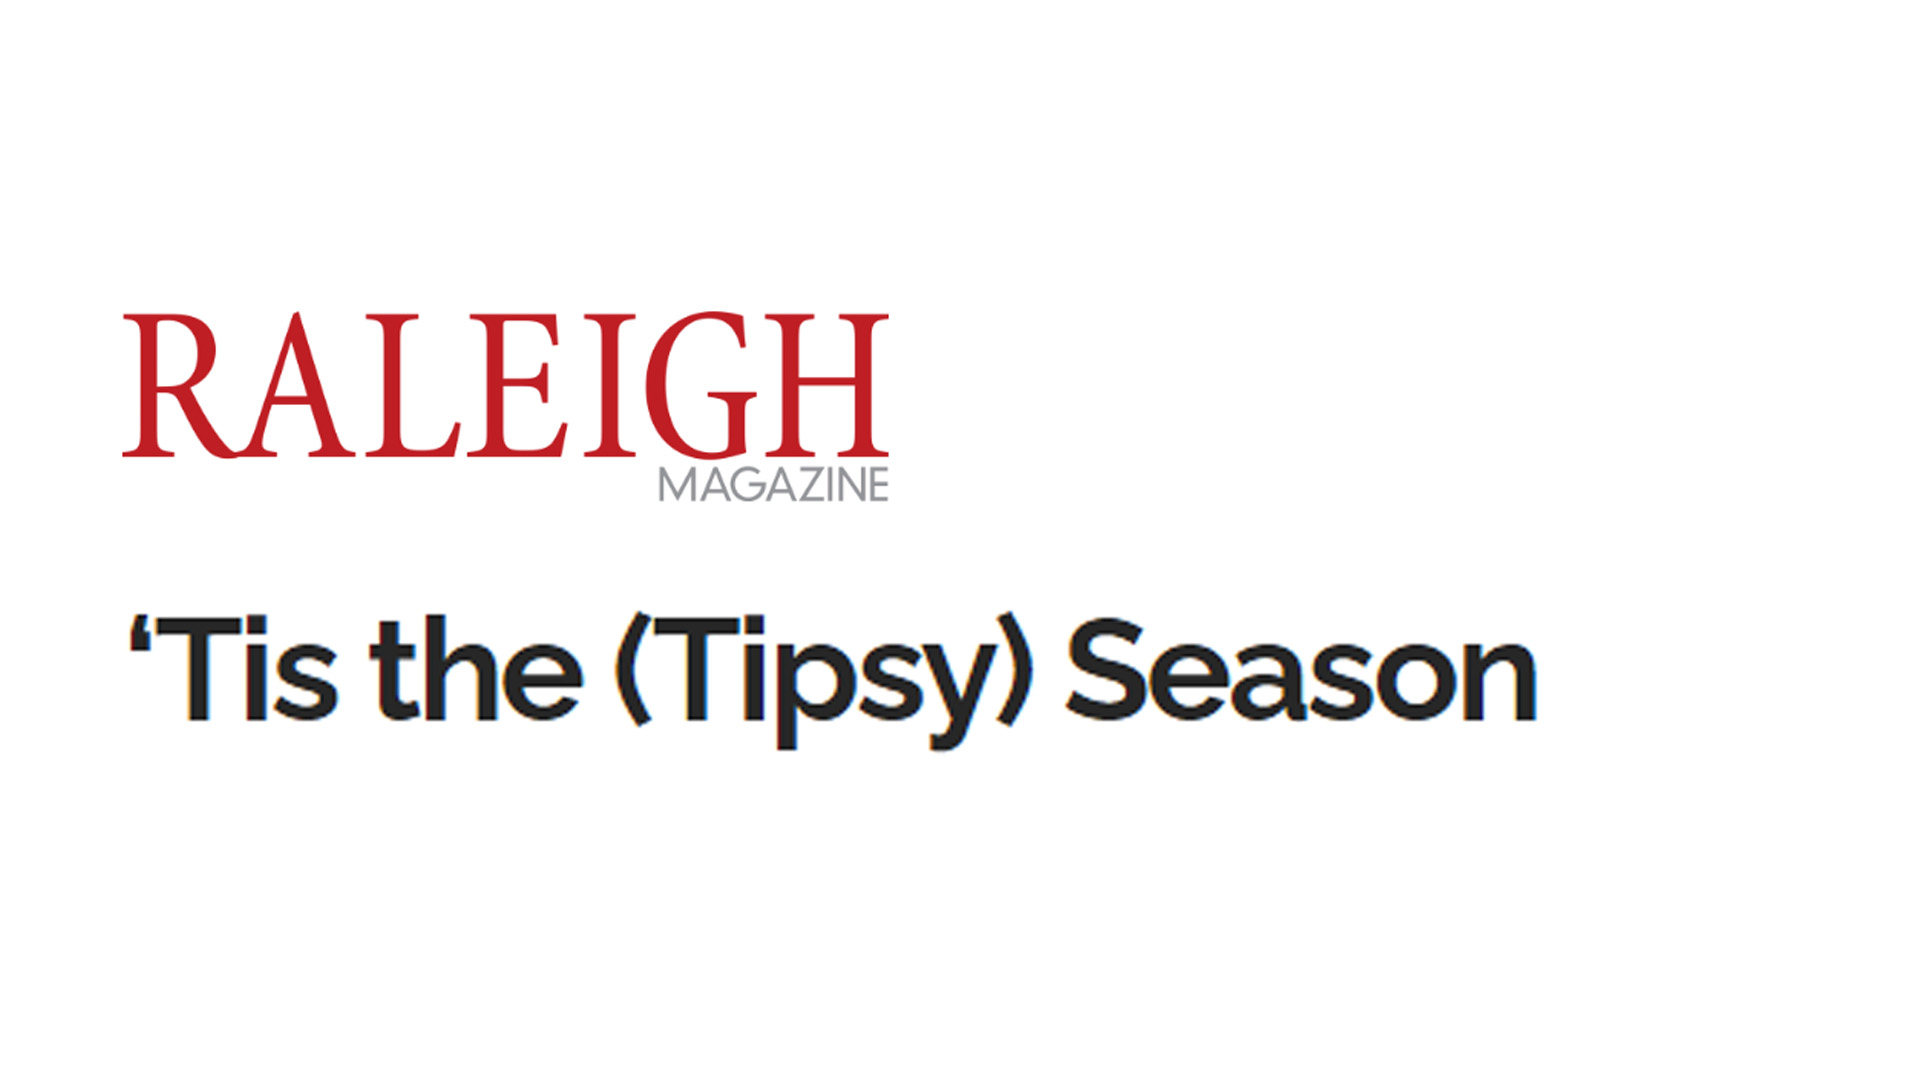 tis the tipsy season olde raleigh distillery feature in raleigh magazine